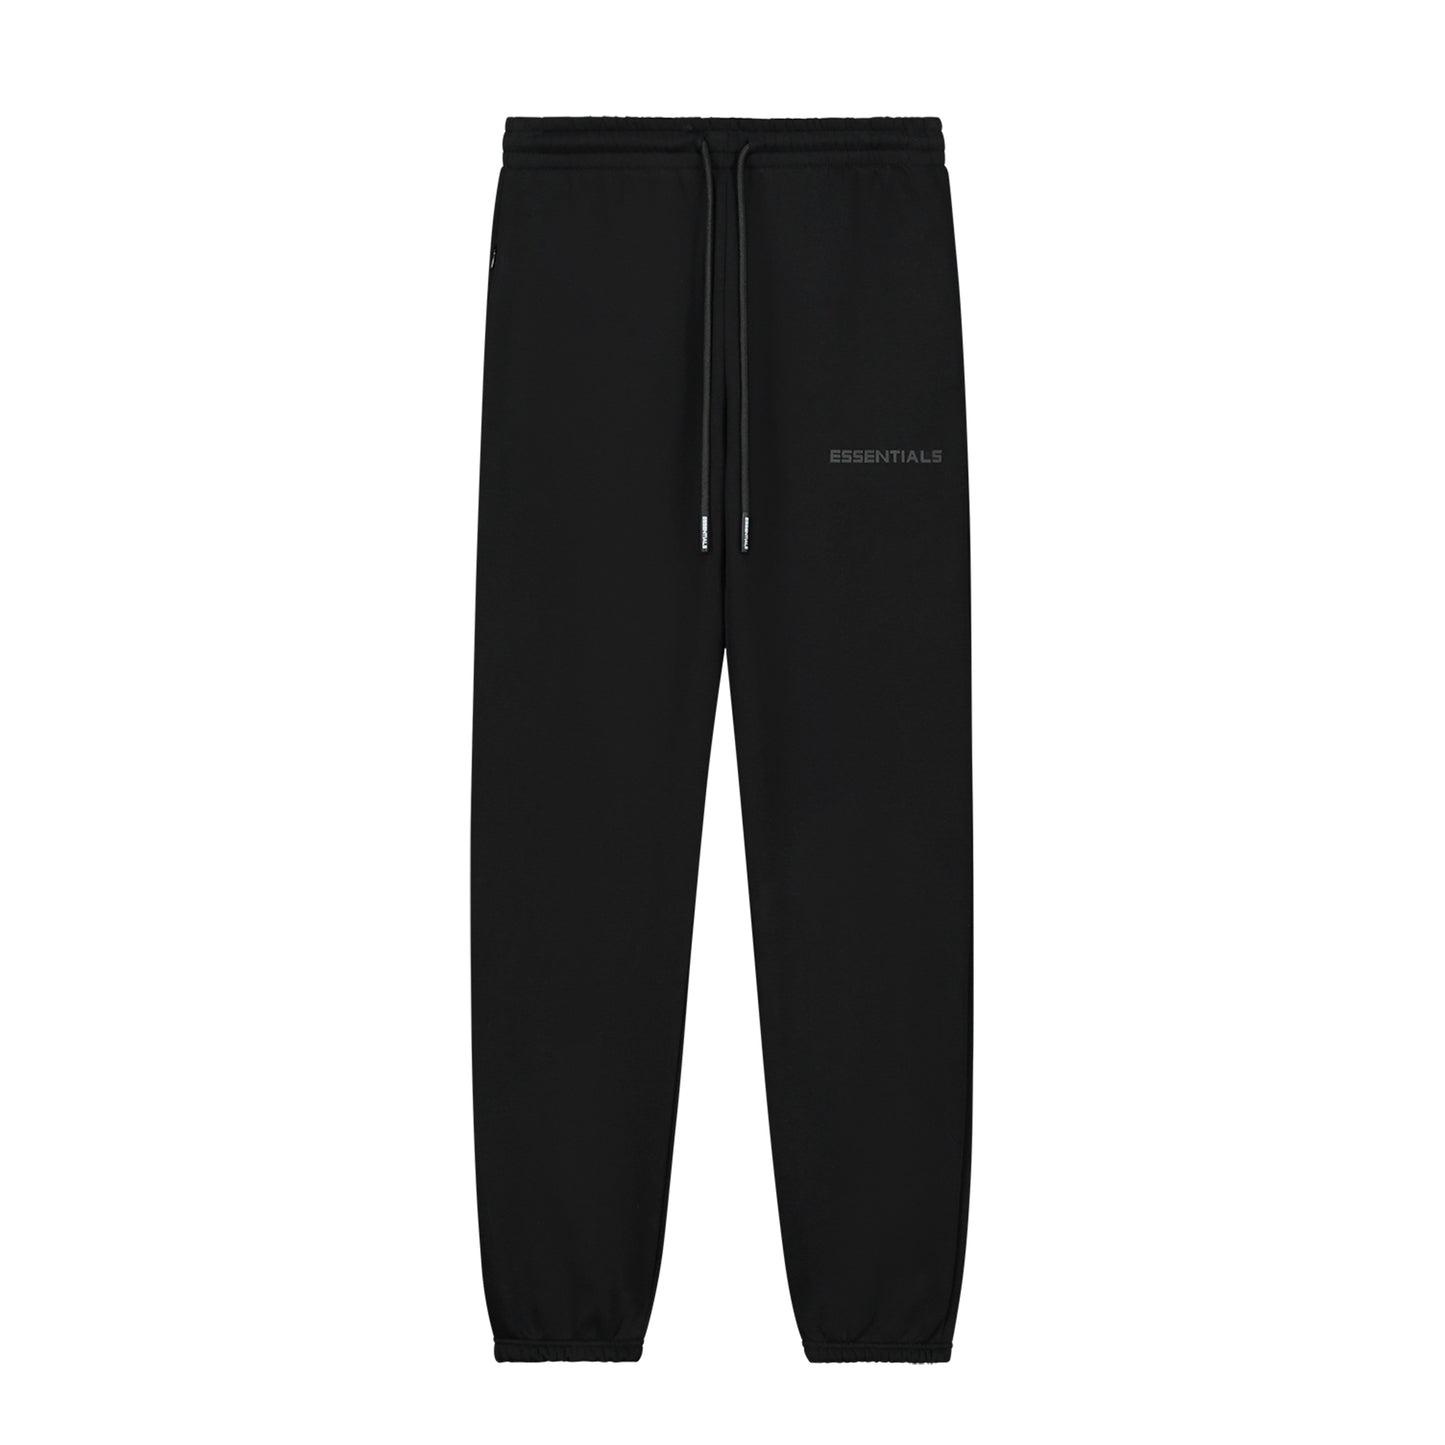 New Classic Tracksuit Black Antra